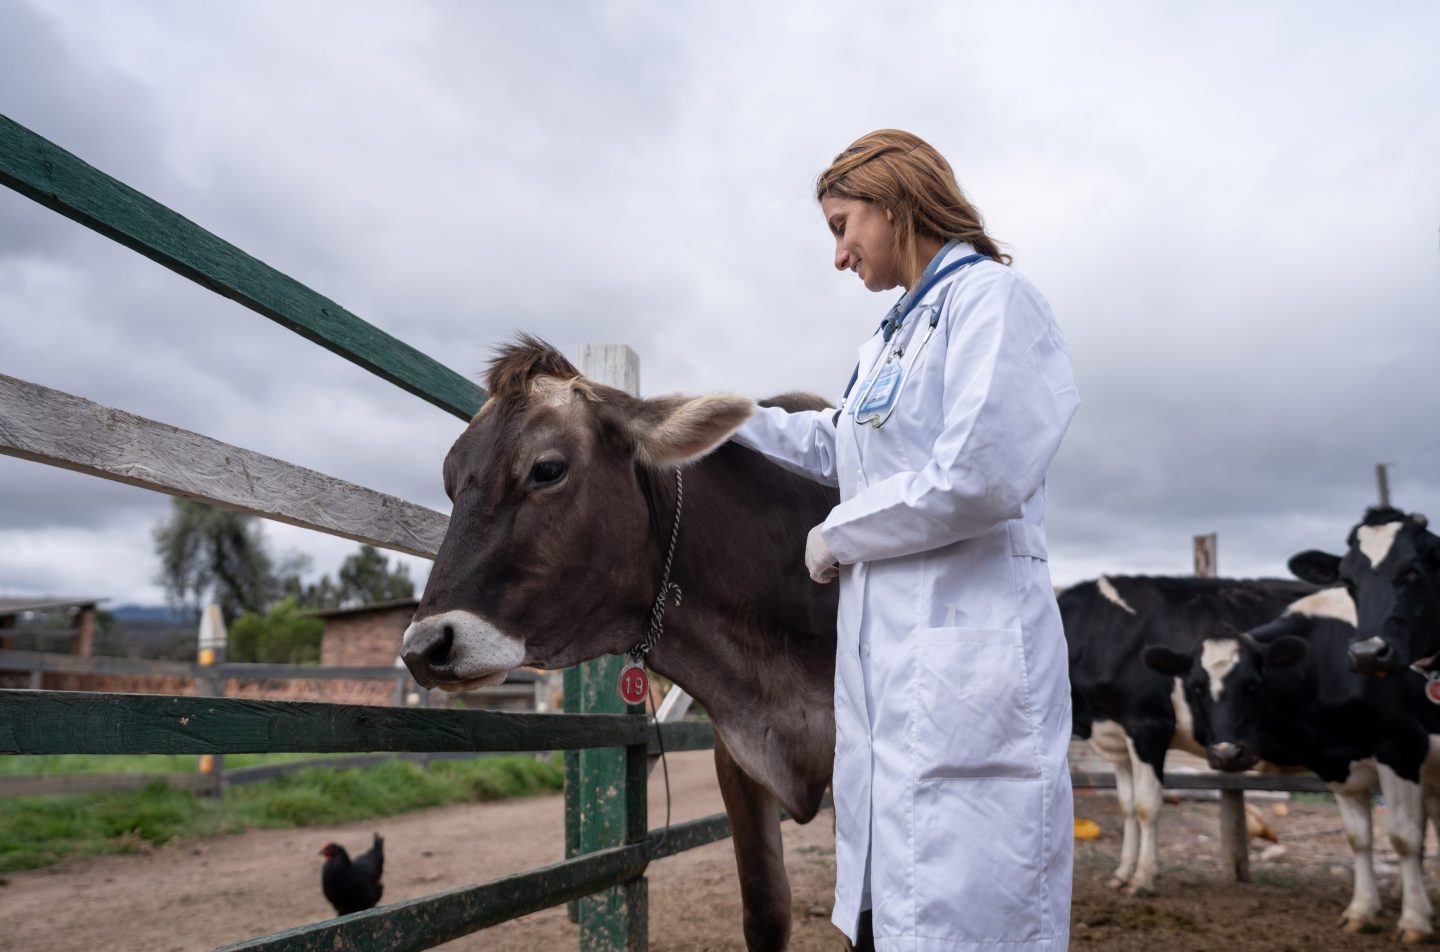 Latin American female veterinarian checking a cow at a livestock farm &#8211; lifestyle concepts